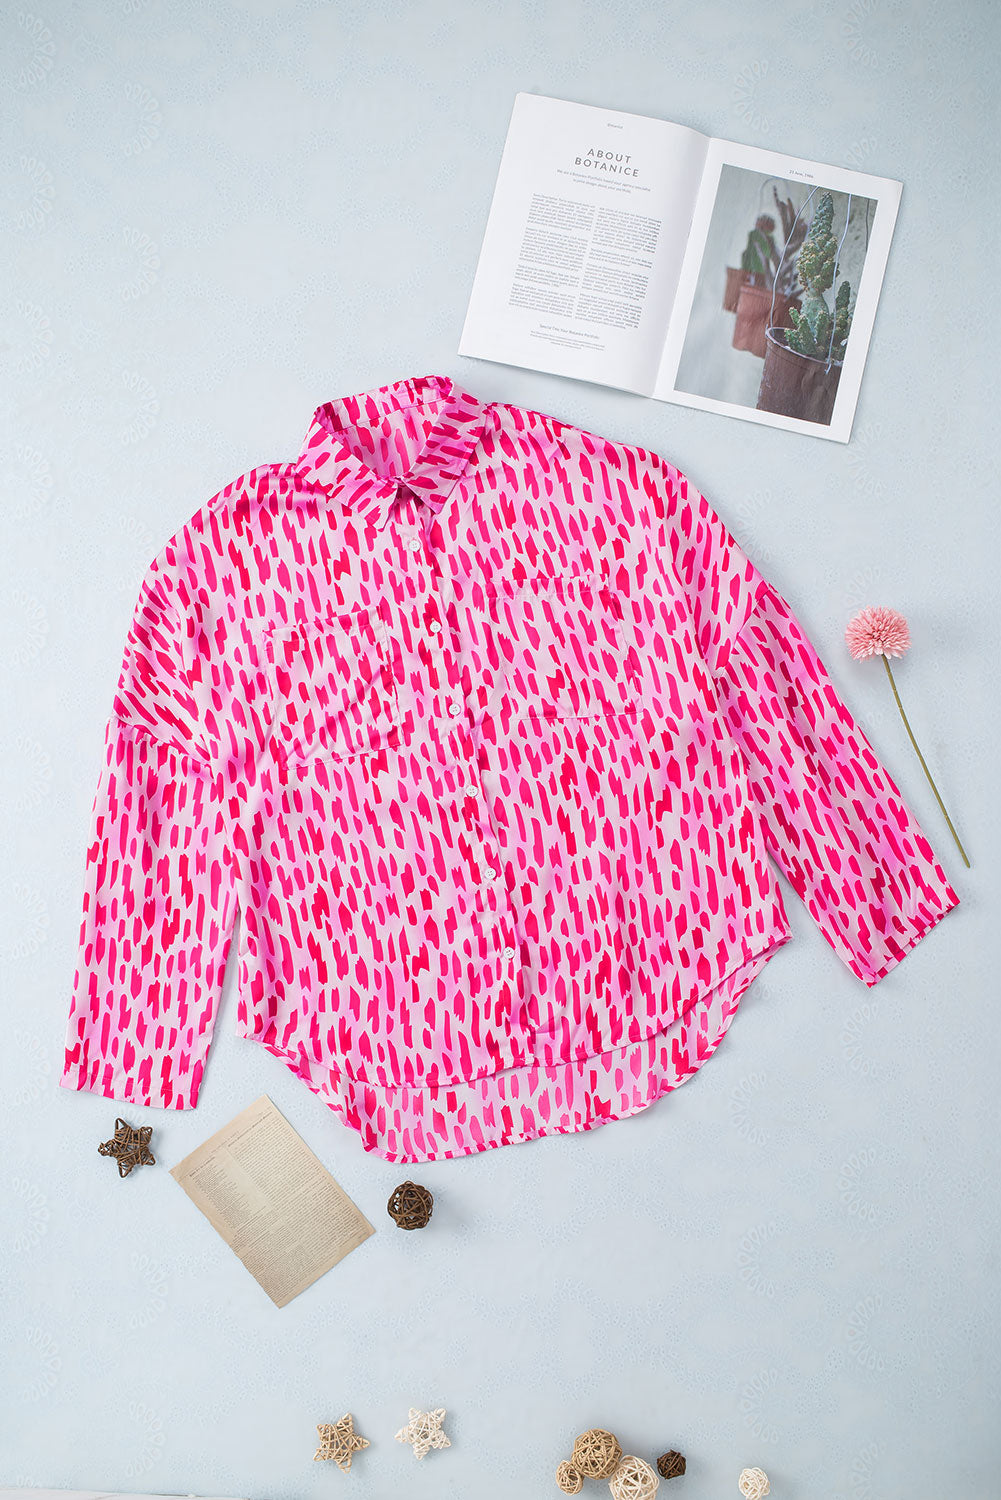 Pink Printed Roll Tab Sleeve Button Up Shirt